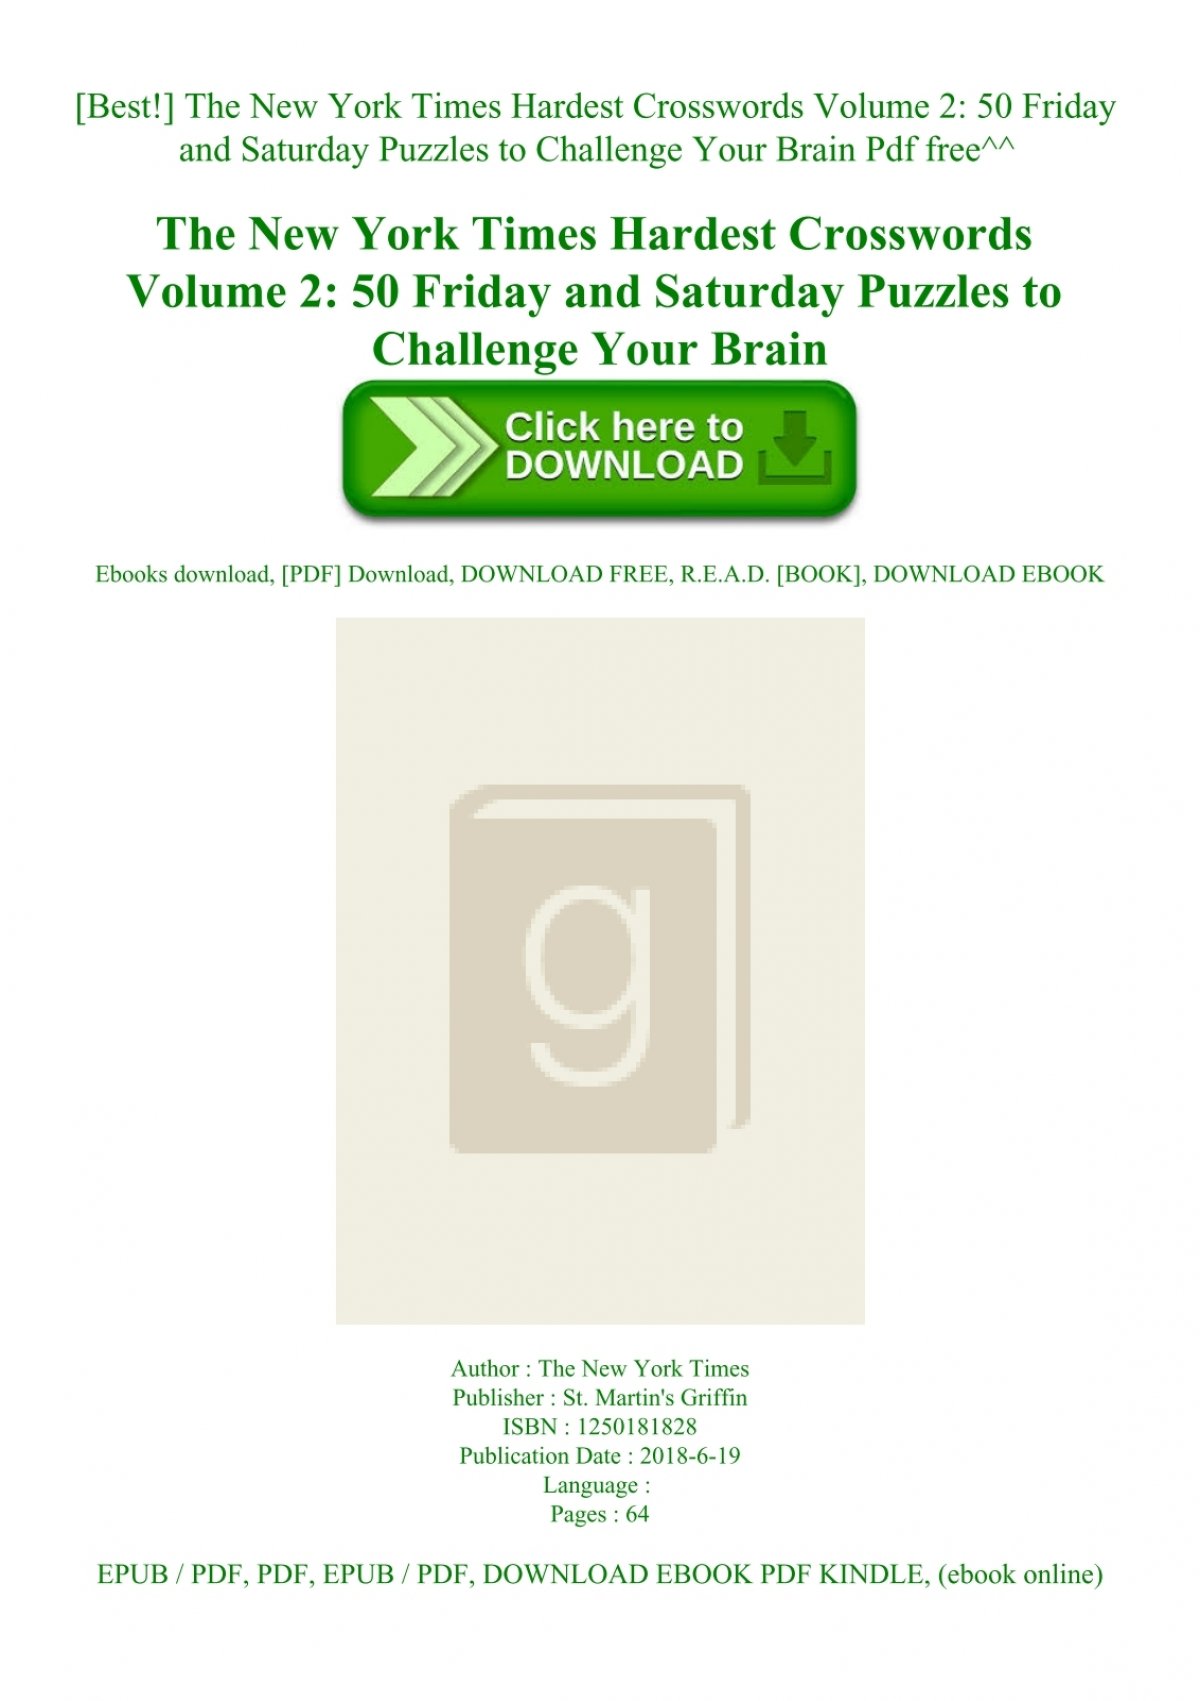 Best The New York Times Hardest Crosswords Volume 2 50 Friday and